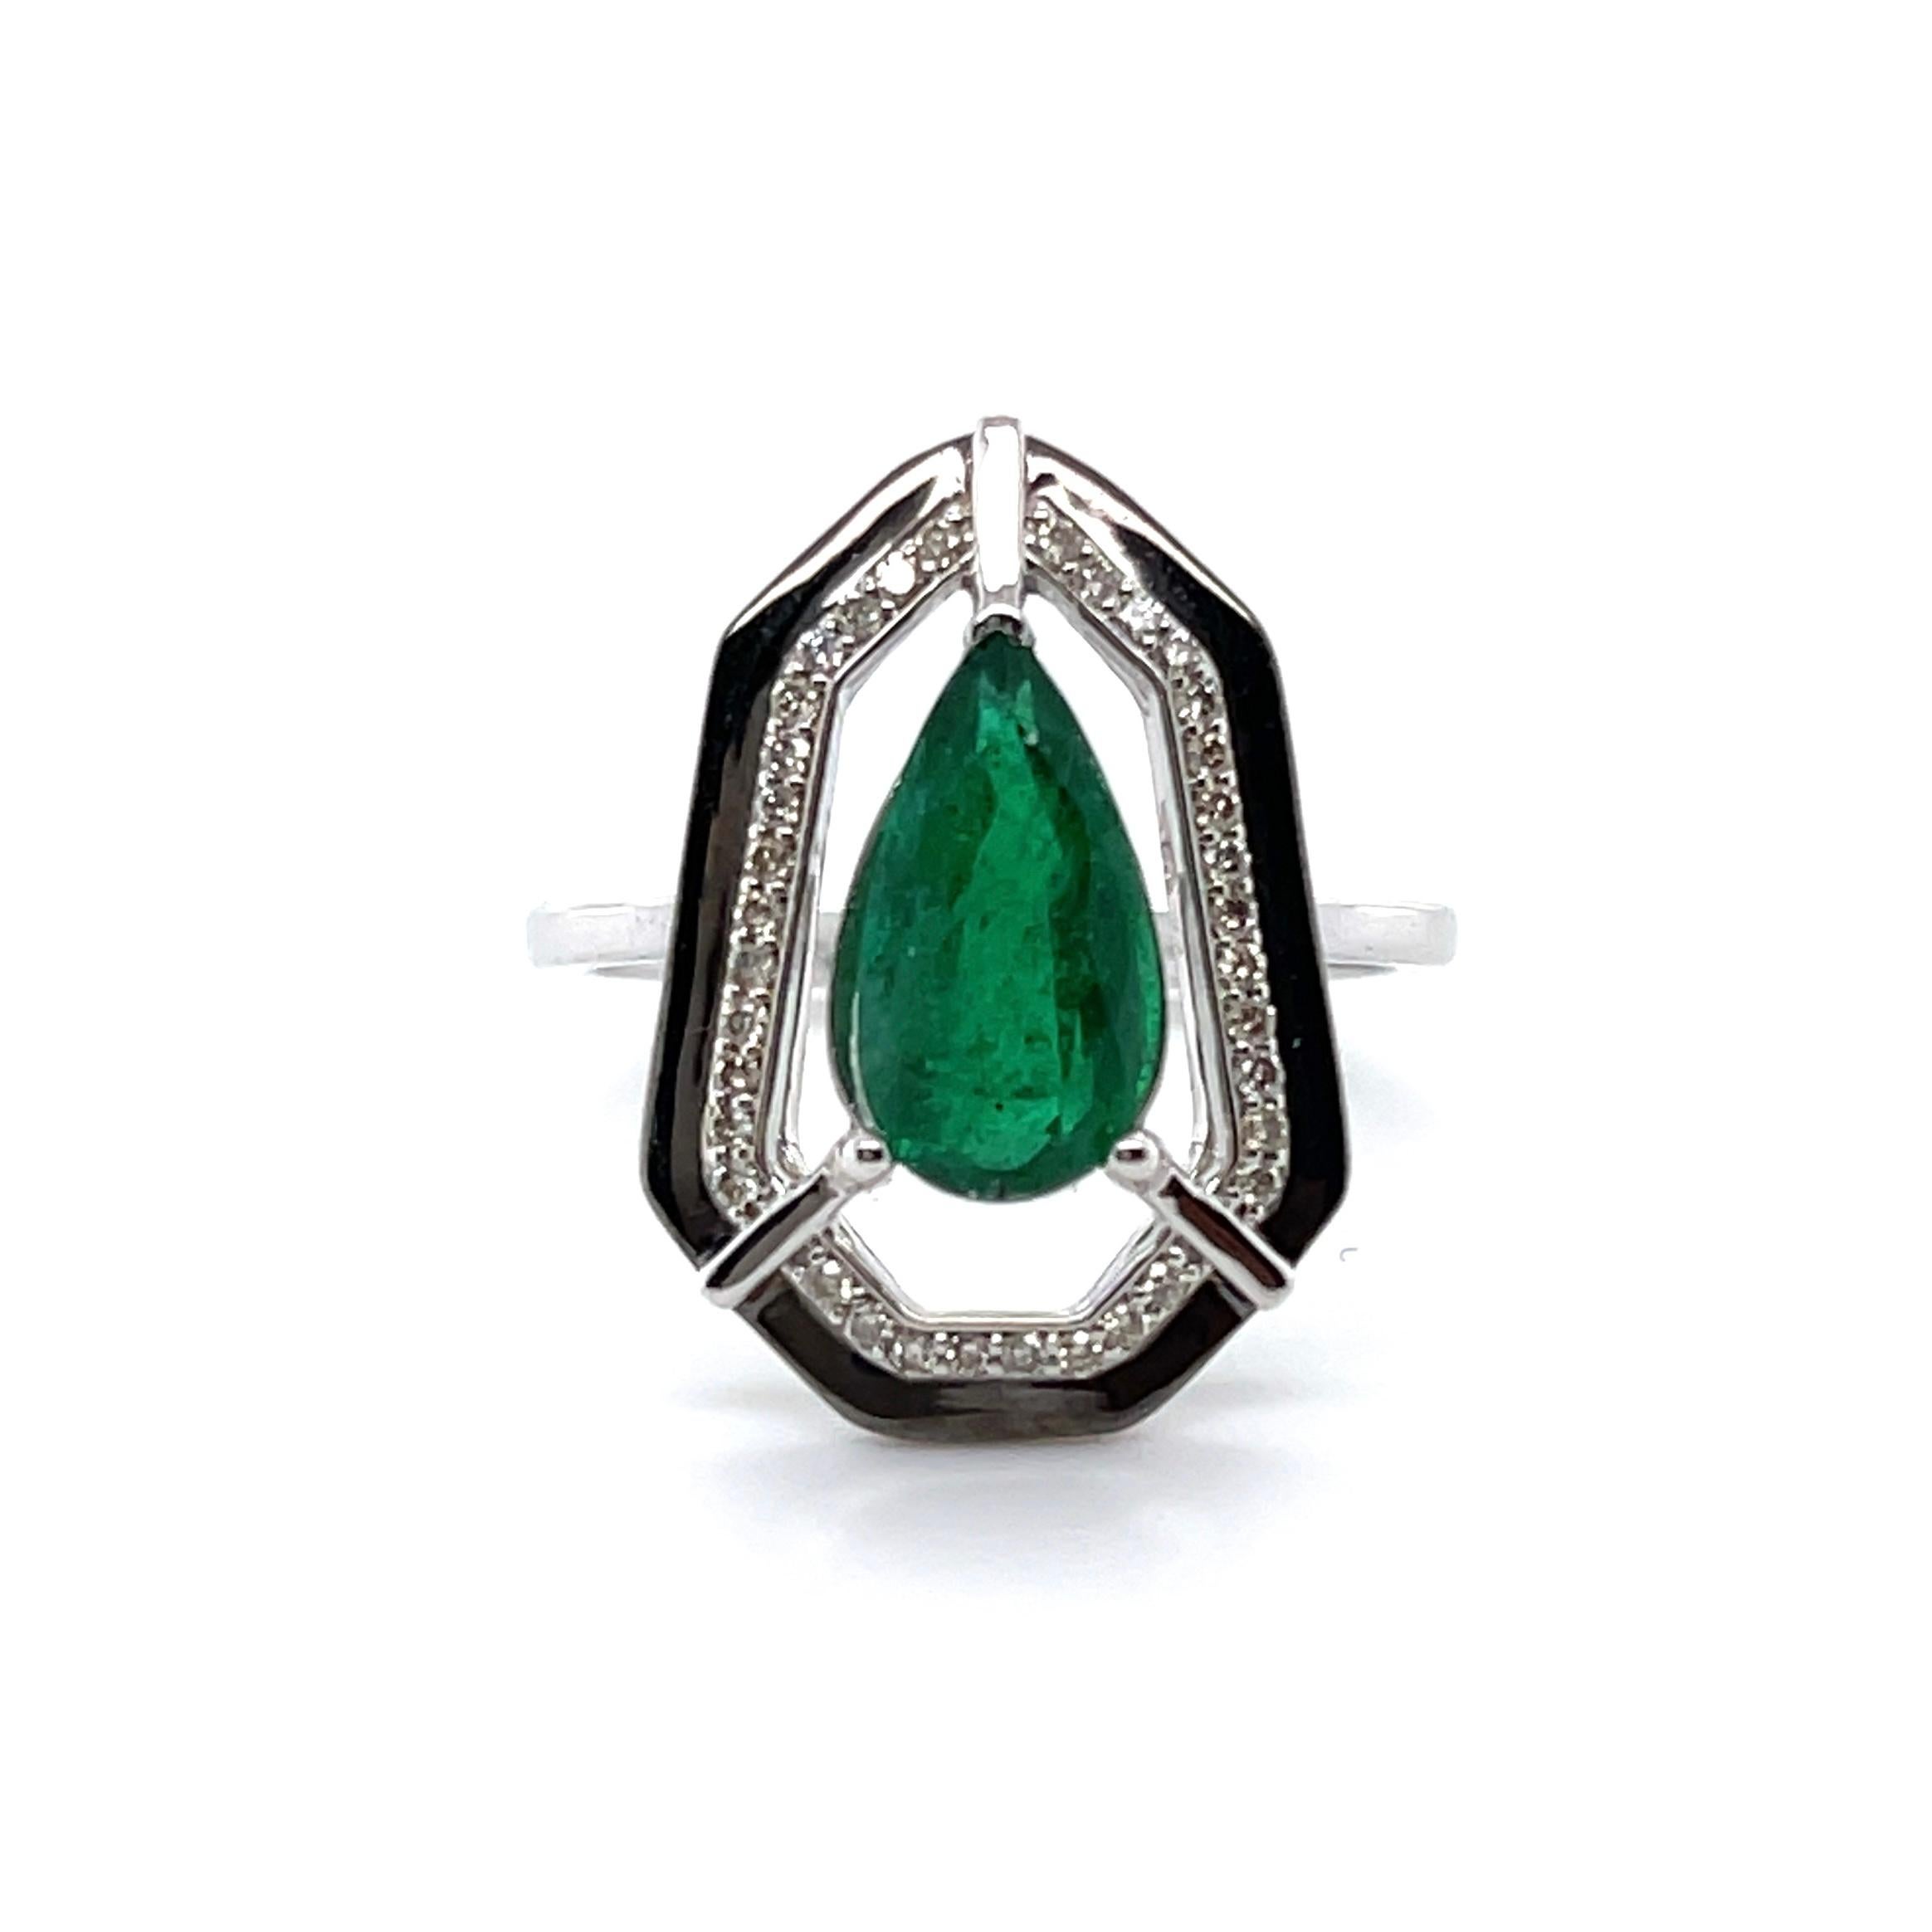 For Sale:  18ct White Gold Emerald Diamond and Onyx Dress Ring